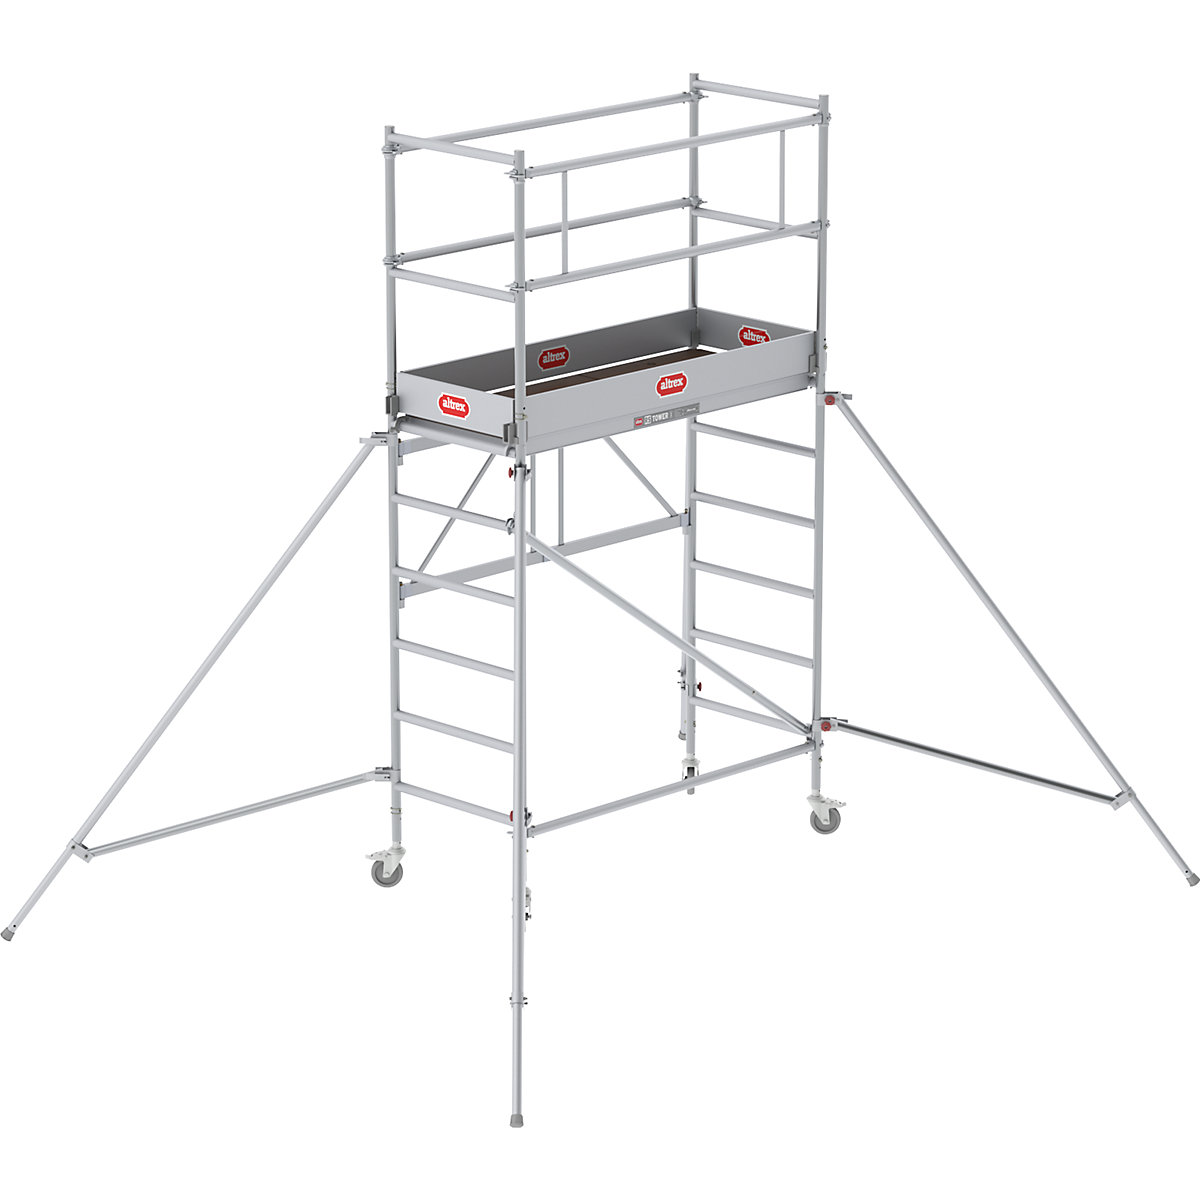 RS TOWER 34 folding tower – Altrex